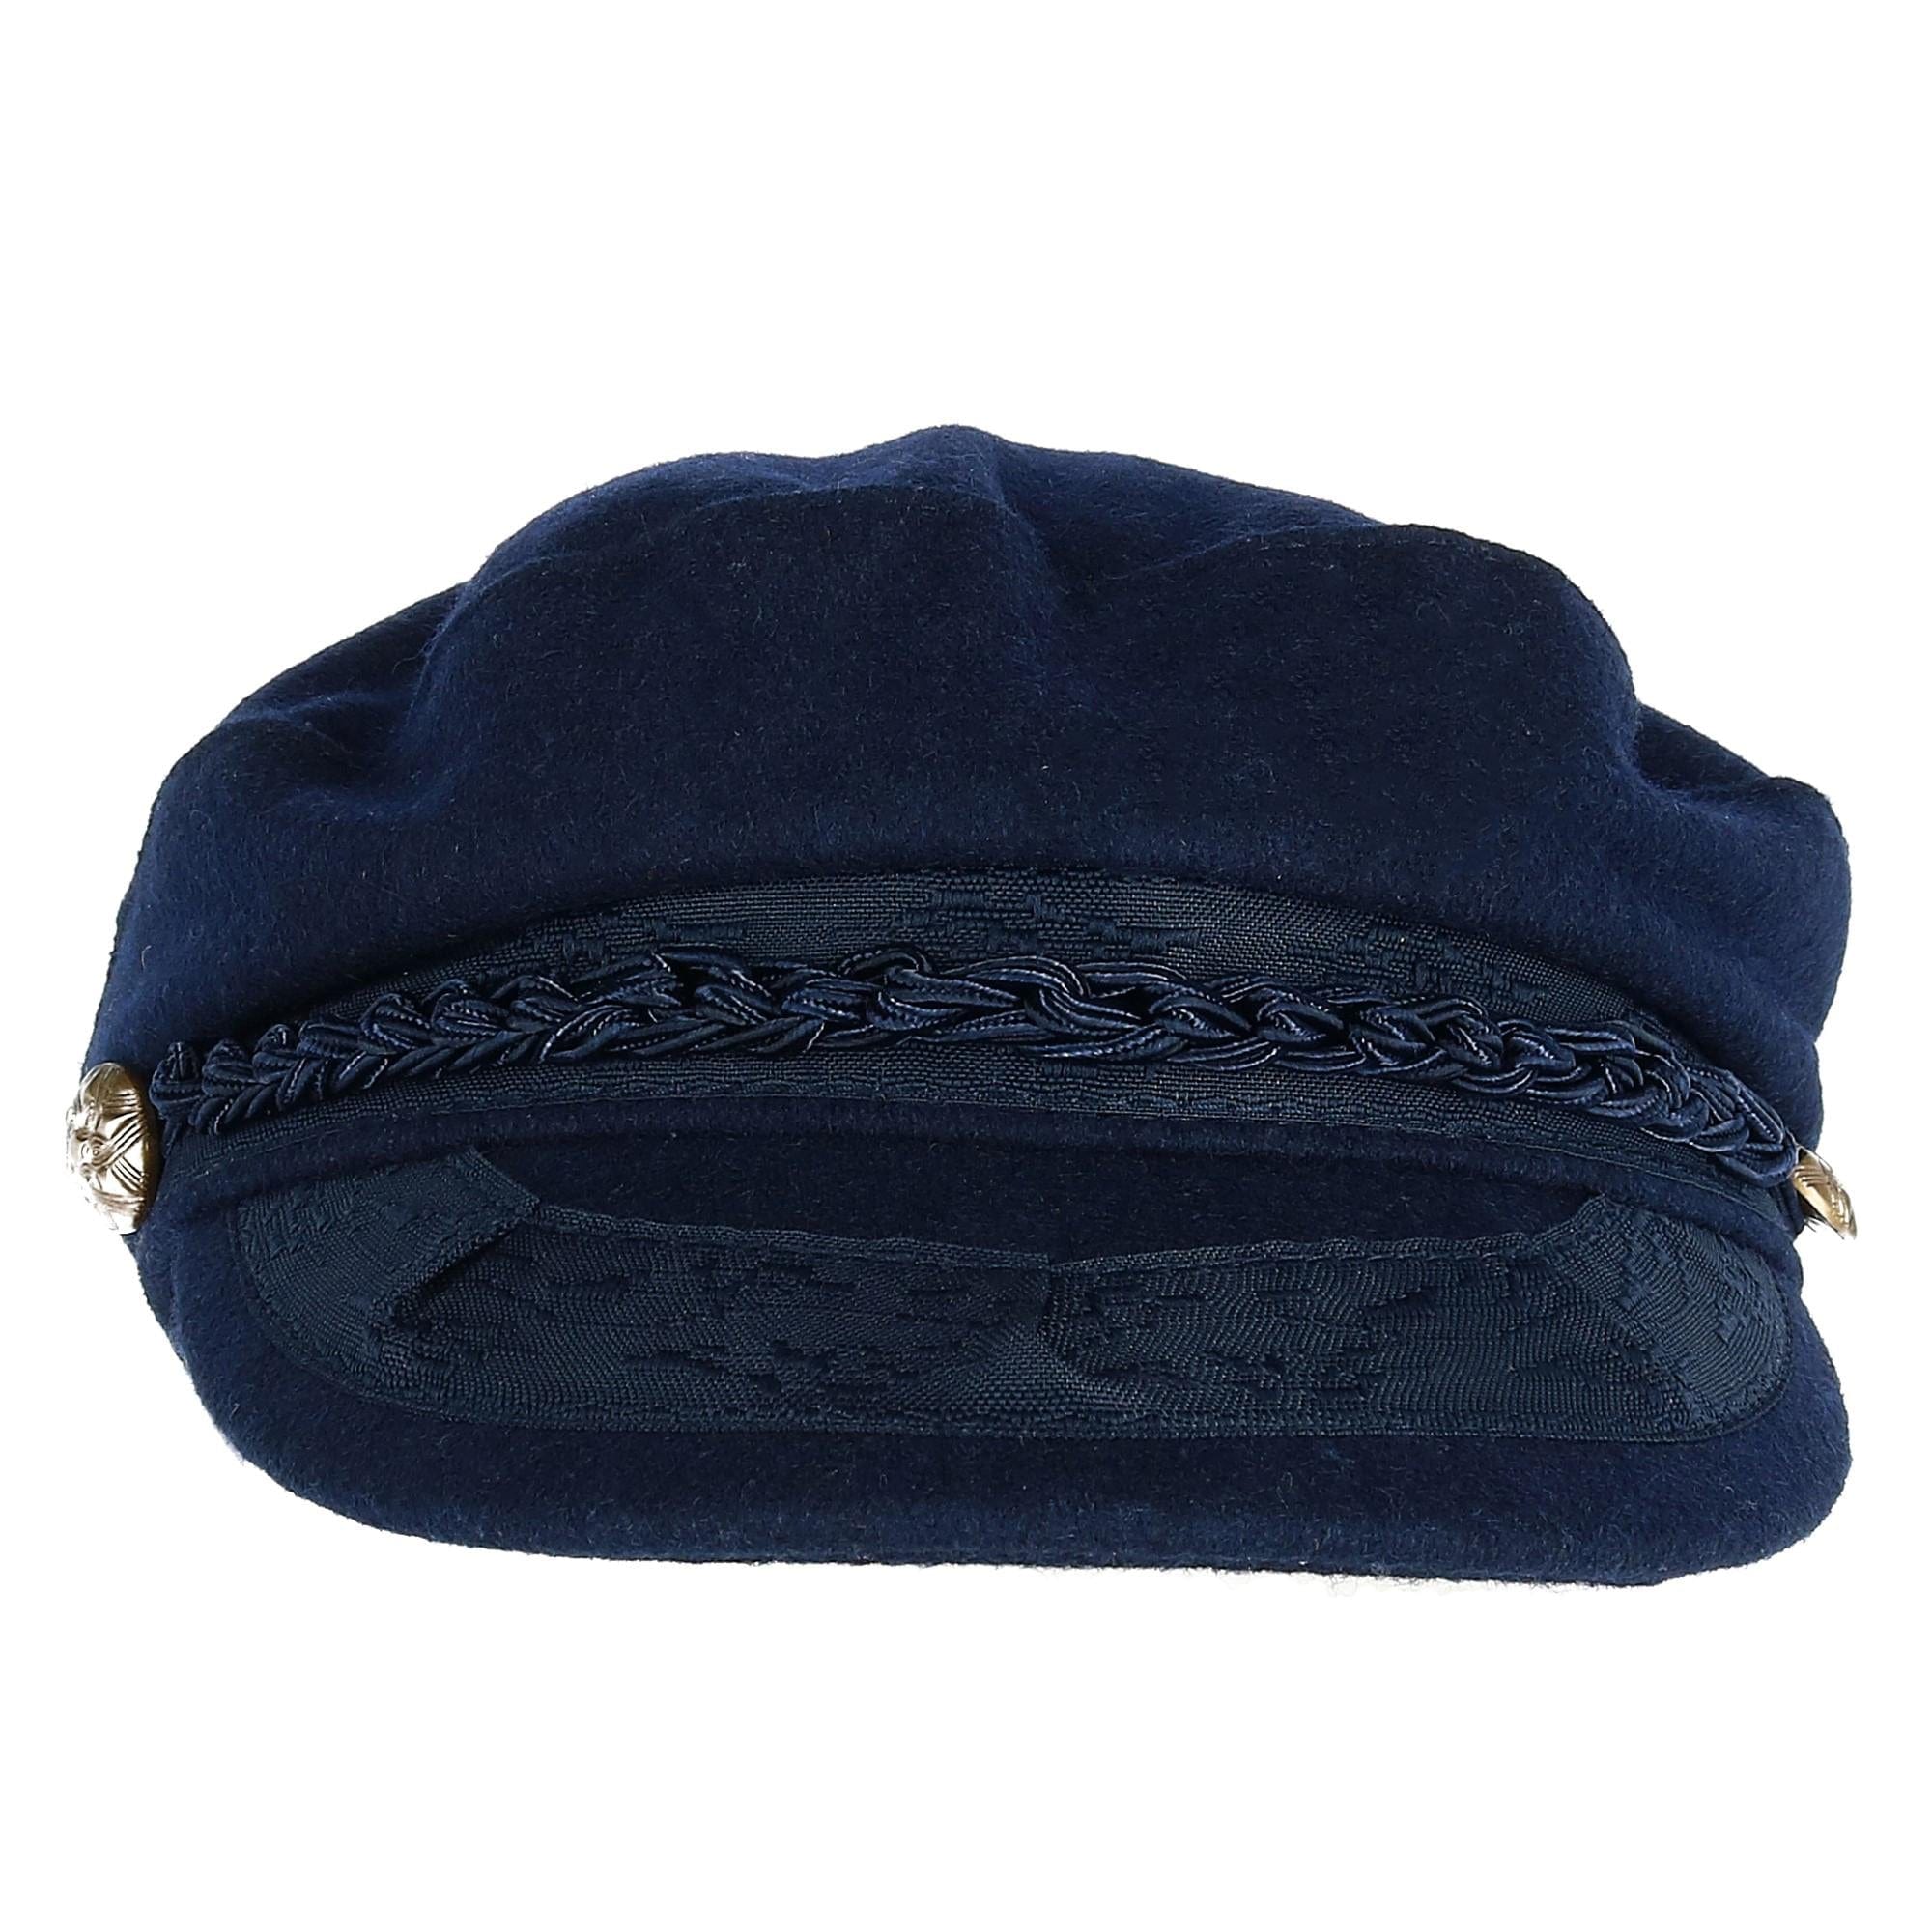 Men's Greek Fisherman Hat with Braided Band by Epoch Hats Company